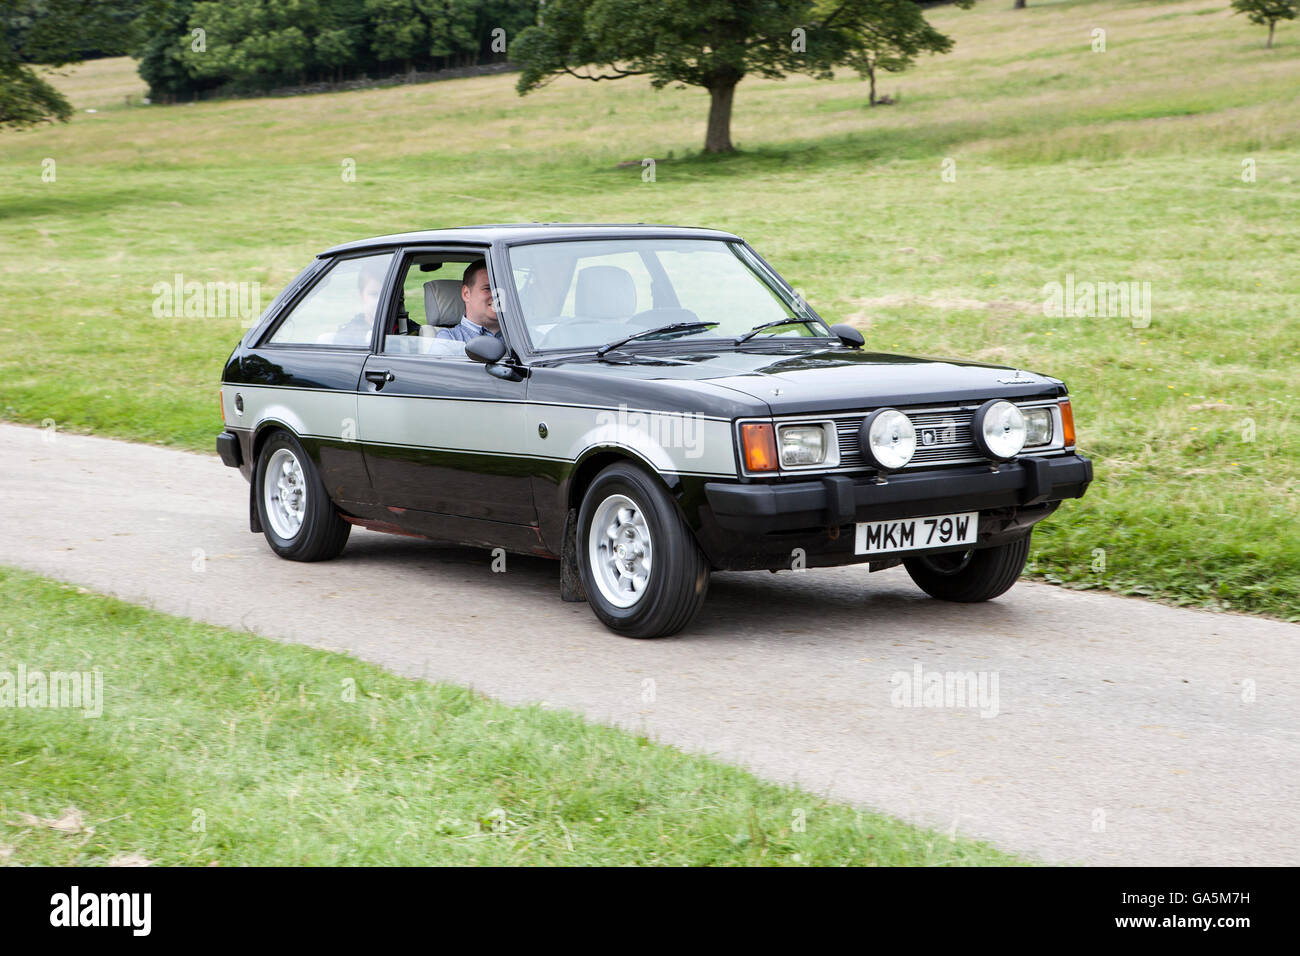 1980 80s black Sunbeam Lotus 2dr saloon at the annual classic car rally in Carnforth in Lancashire.  19809s British classic sports cars at the spectator event drew thousands of visitors to this scenic part of the country on the north west coast of England. Stock Photo